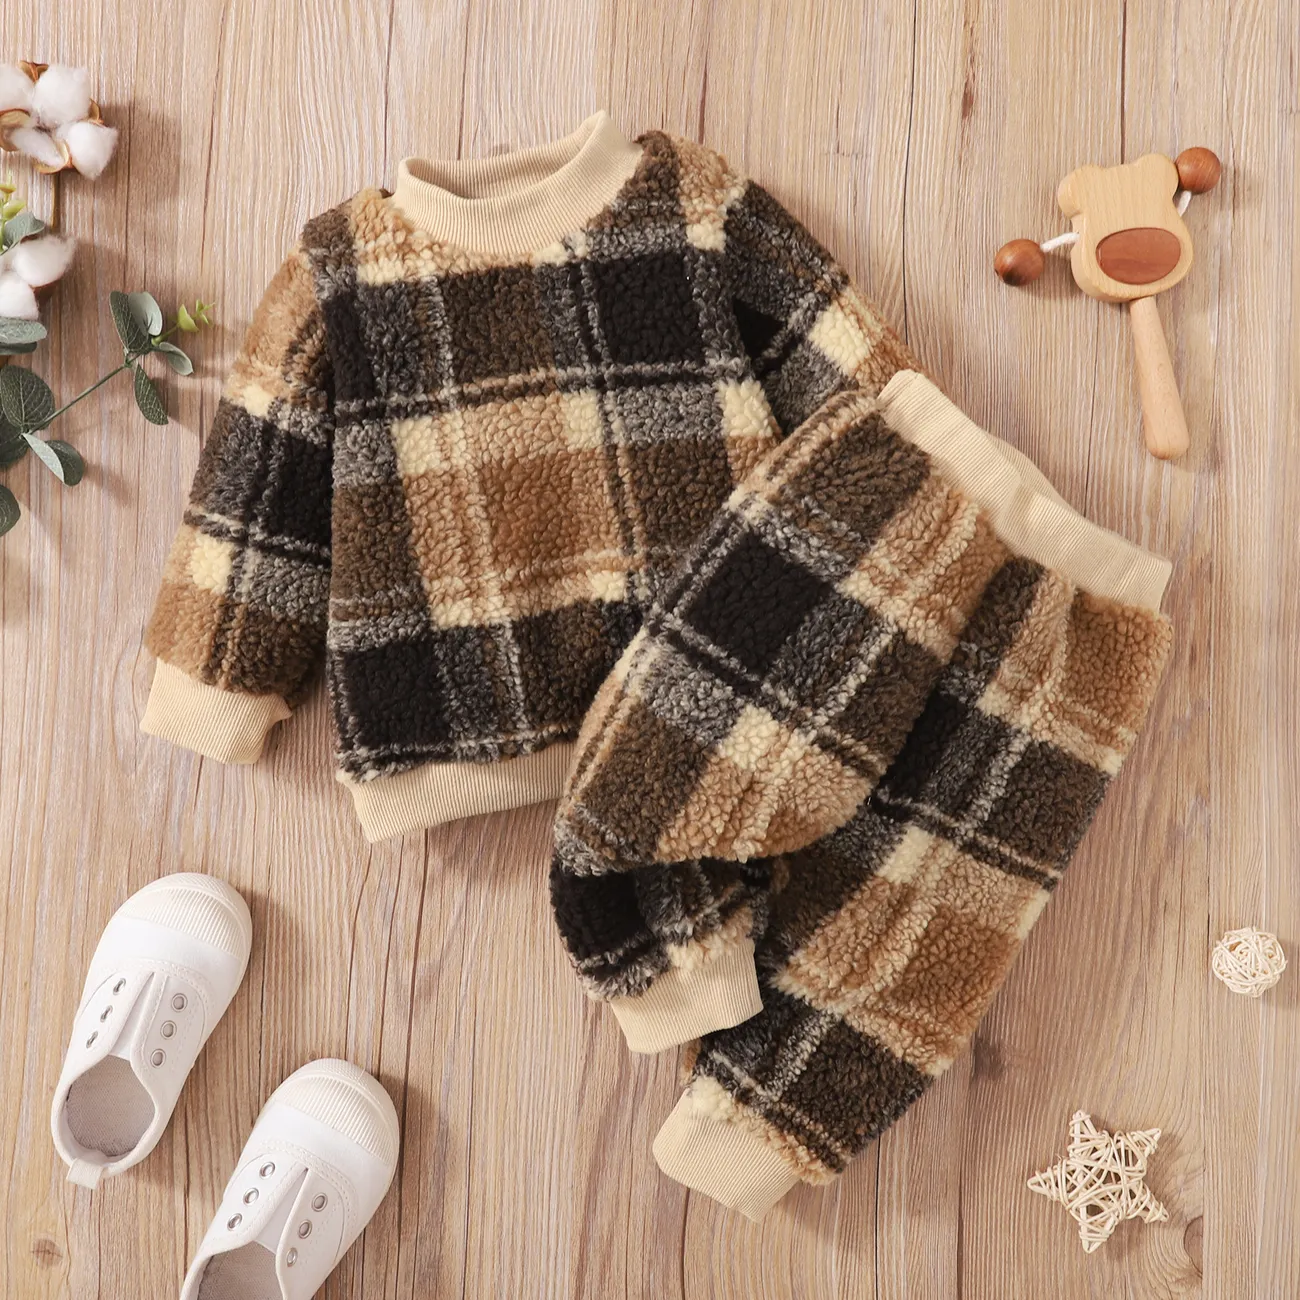 2-piece Toddler Boy Plaid Fuzzy Pullover Sweatshirt and Pants Set Coffee big image 1